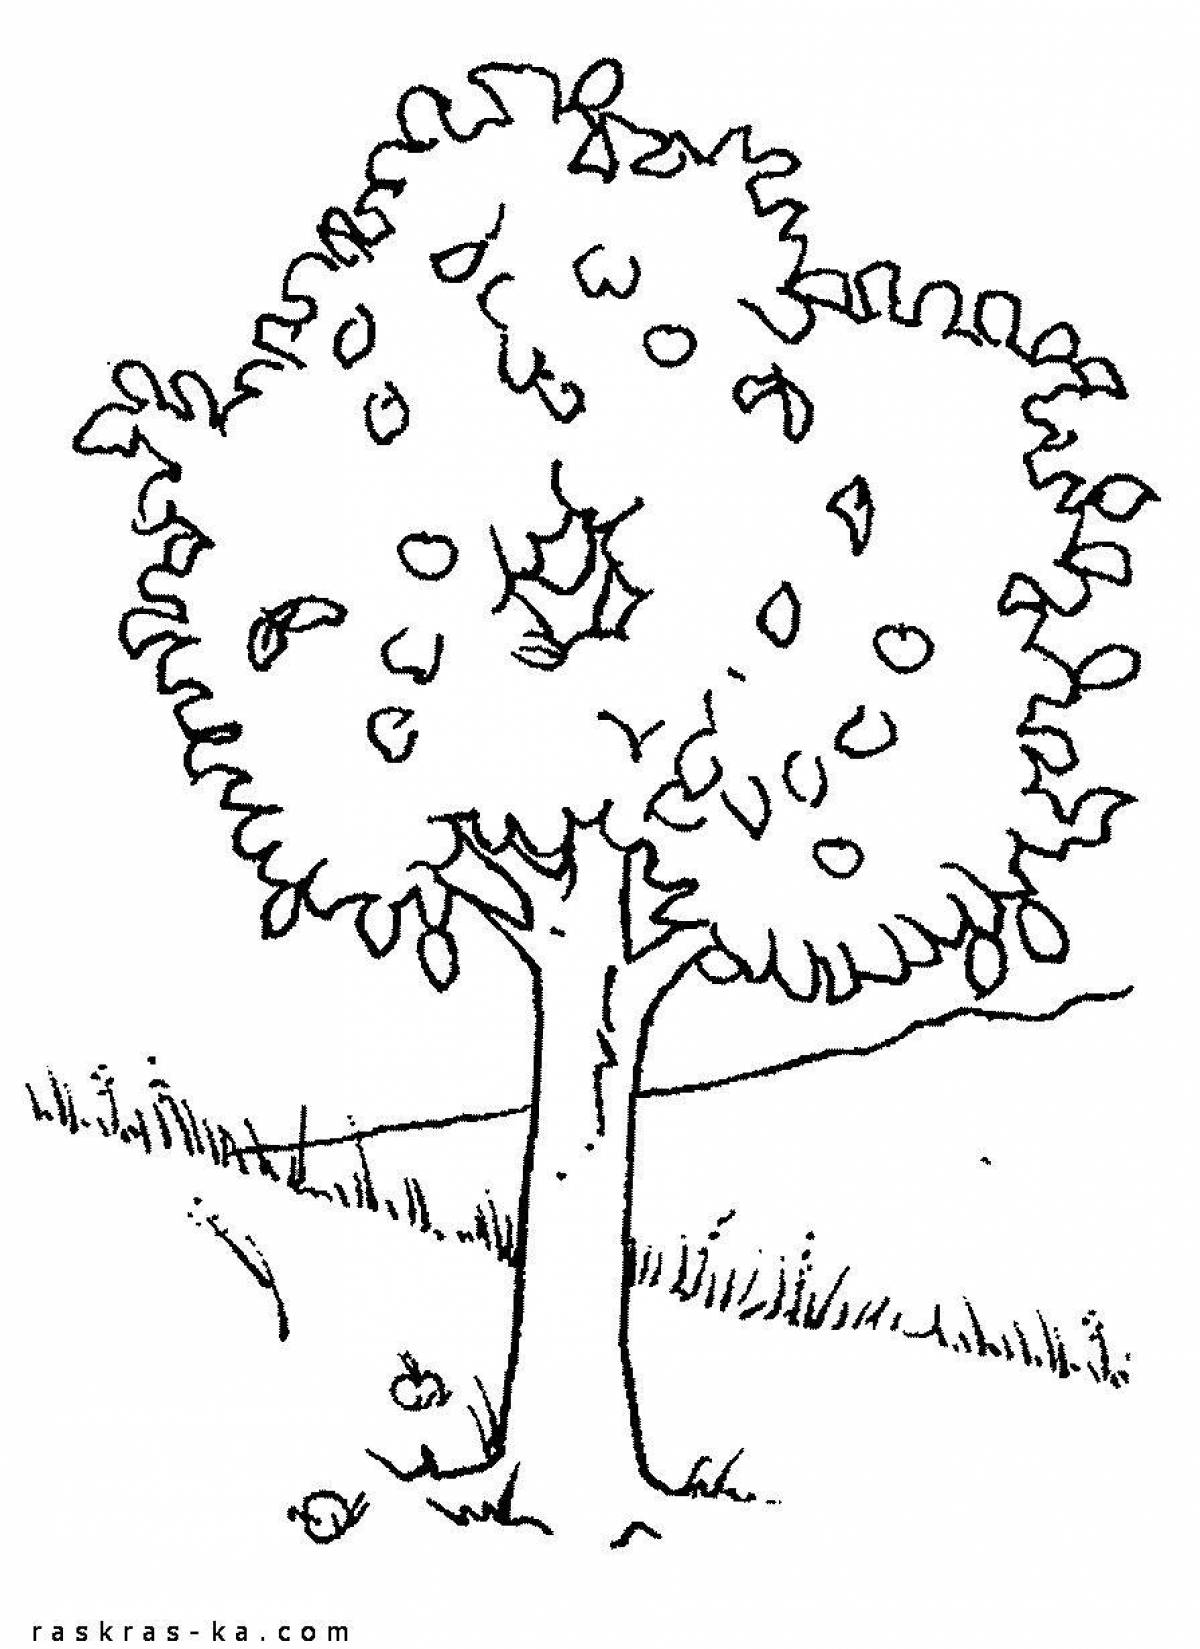 Coloring for a country tree for children 5-6 years old